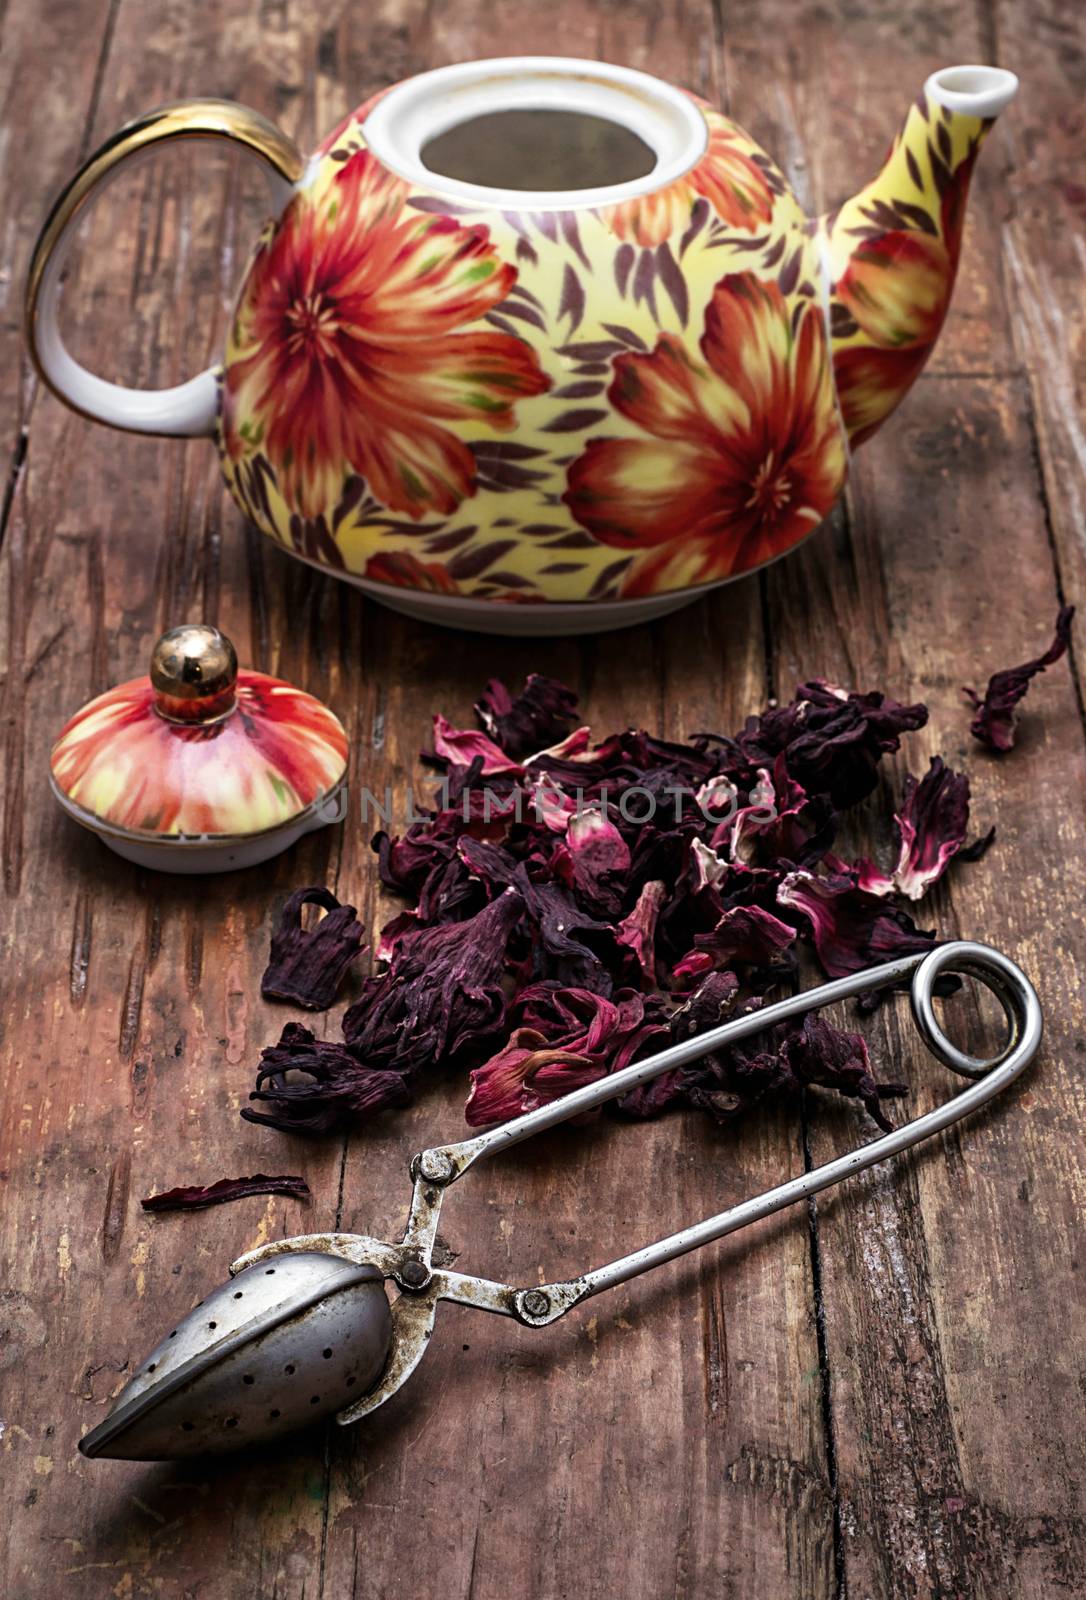 the teapot in the background of elite sorts of tea.the image is tinted in vintage style